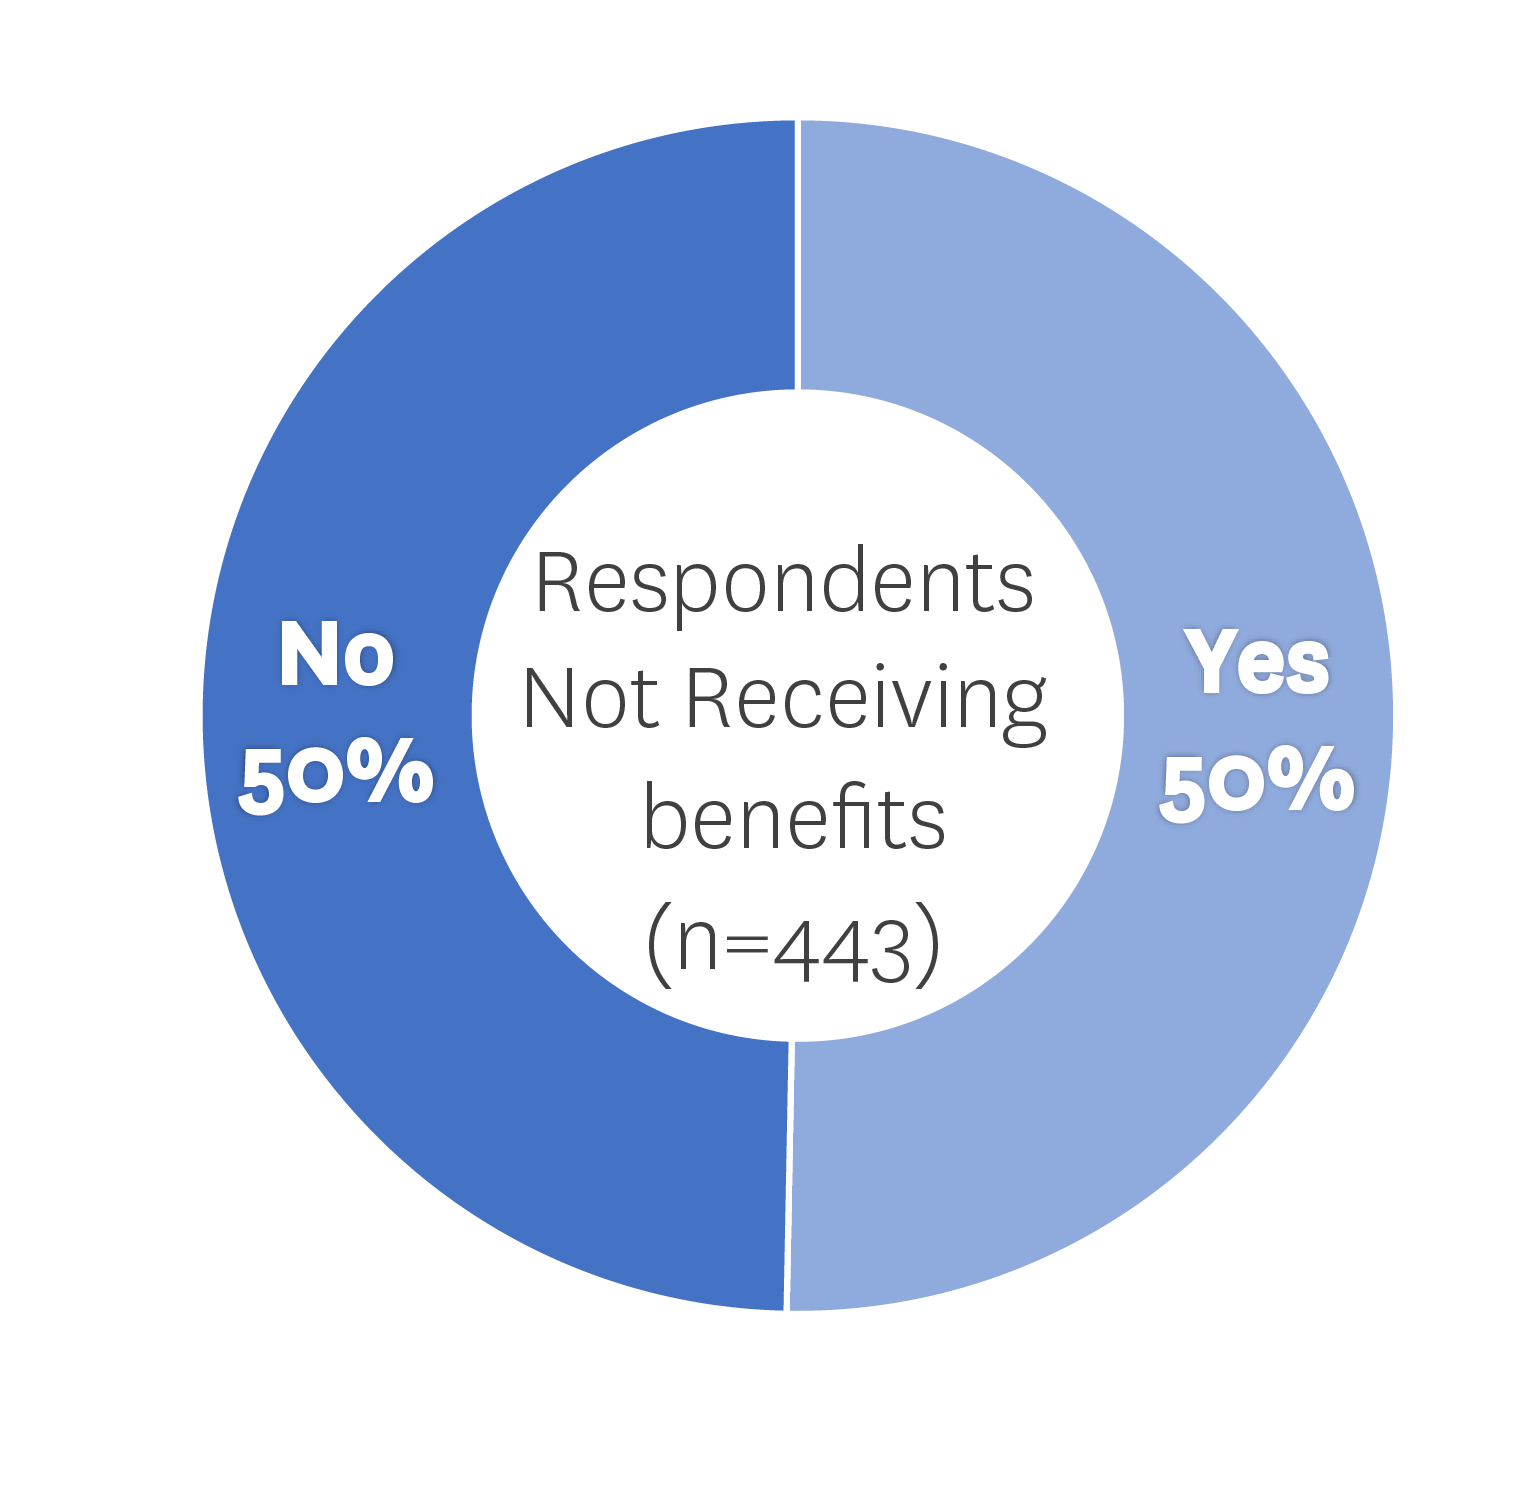 A pie chart showing 50% of survey respondents who do not receive benefits needing childcare for most of the day